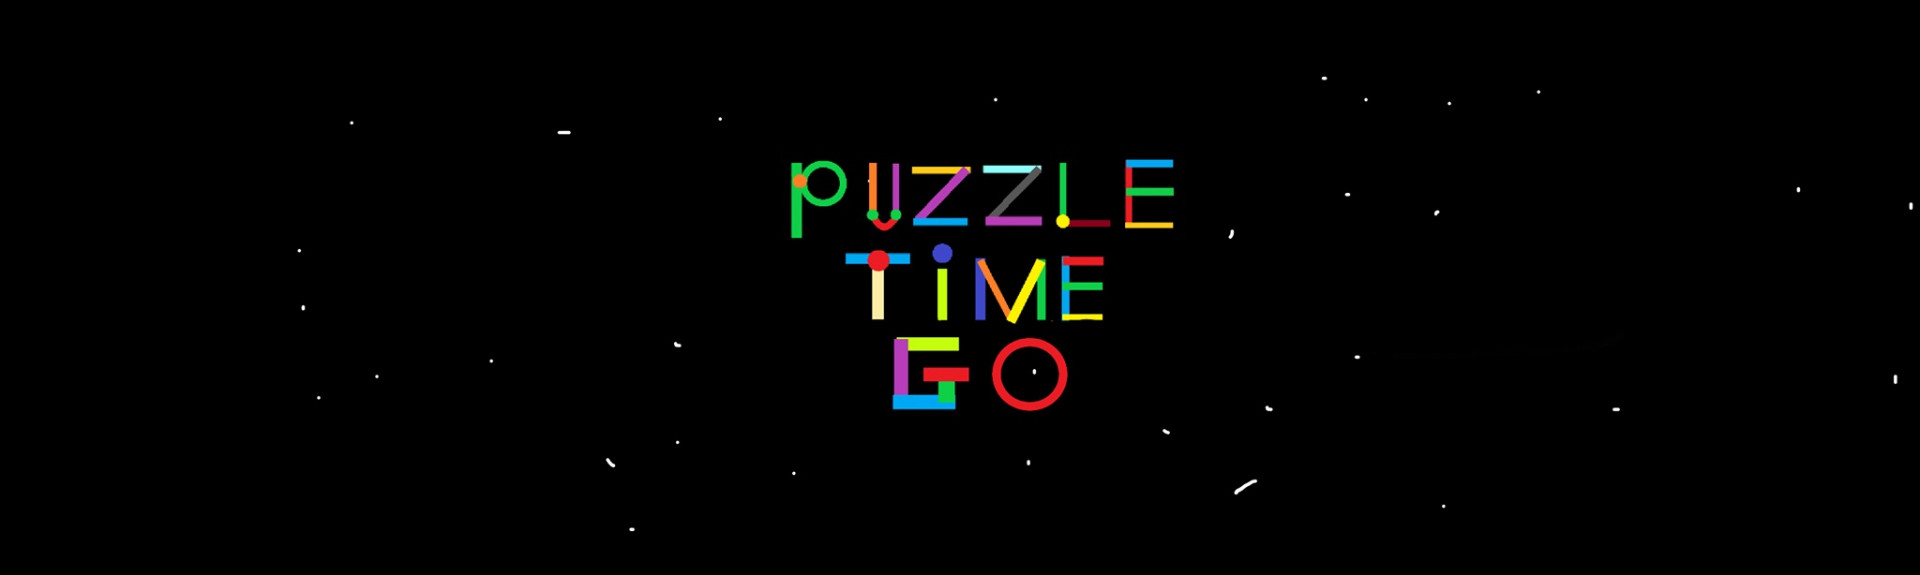 Puzzle Time Go